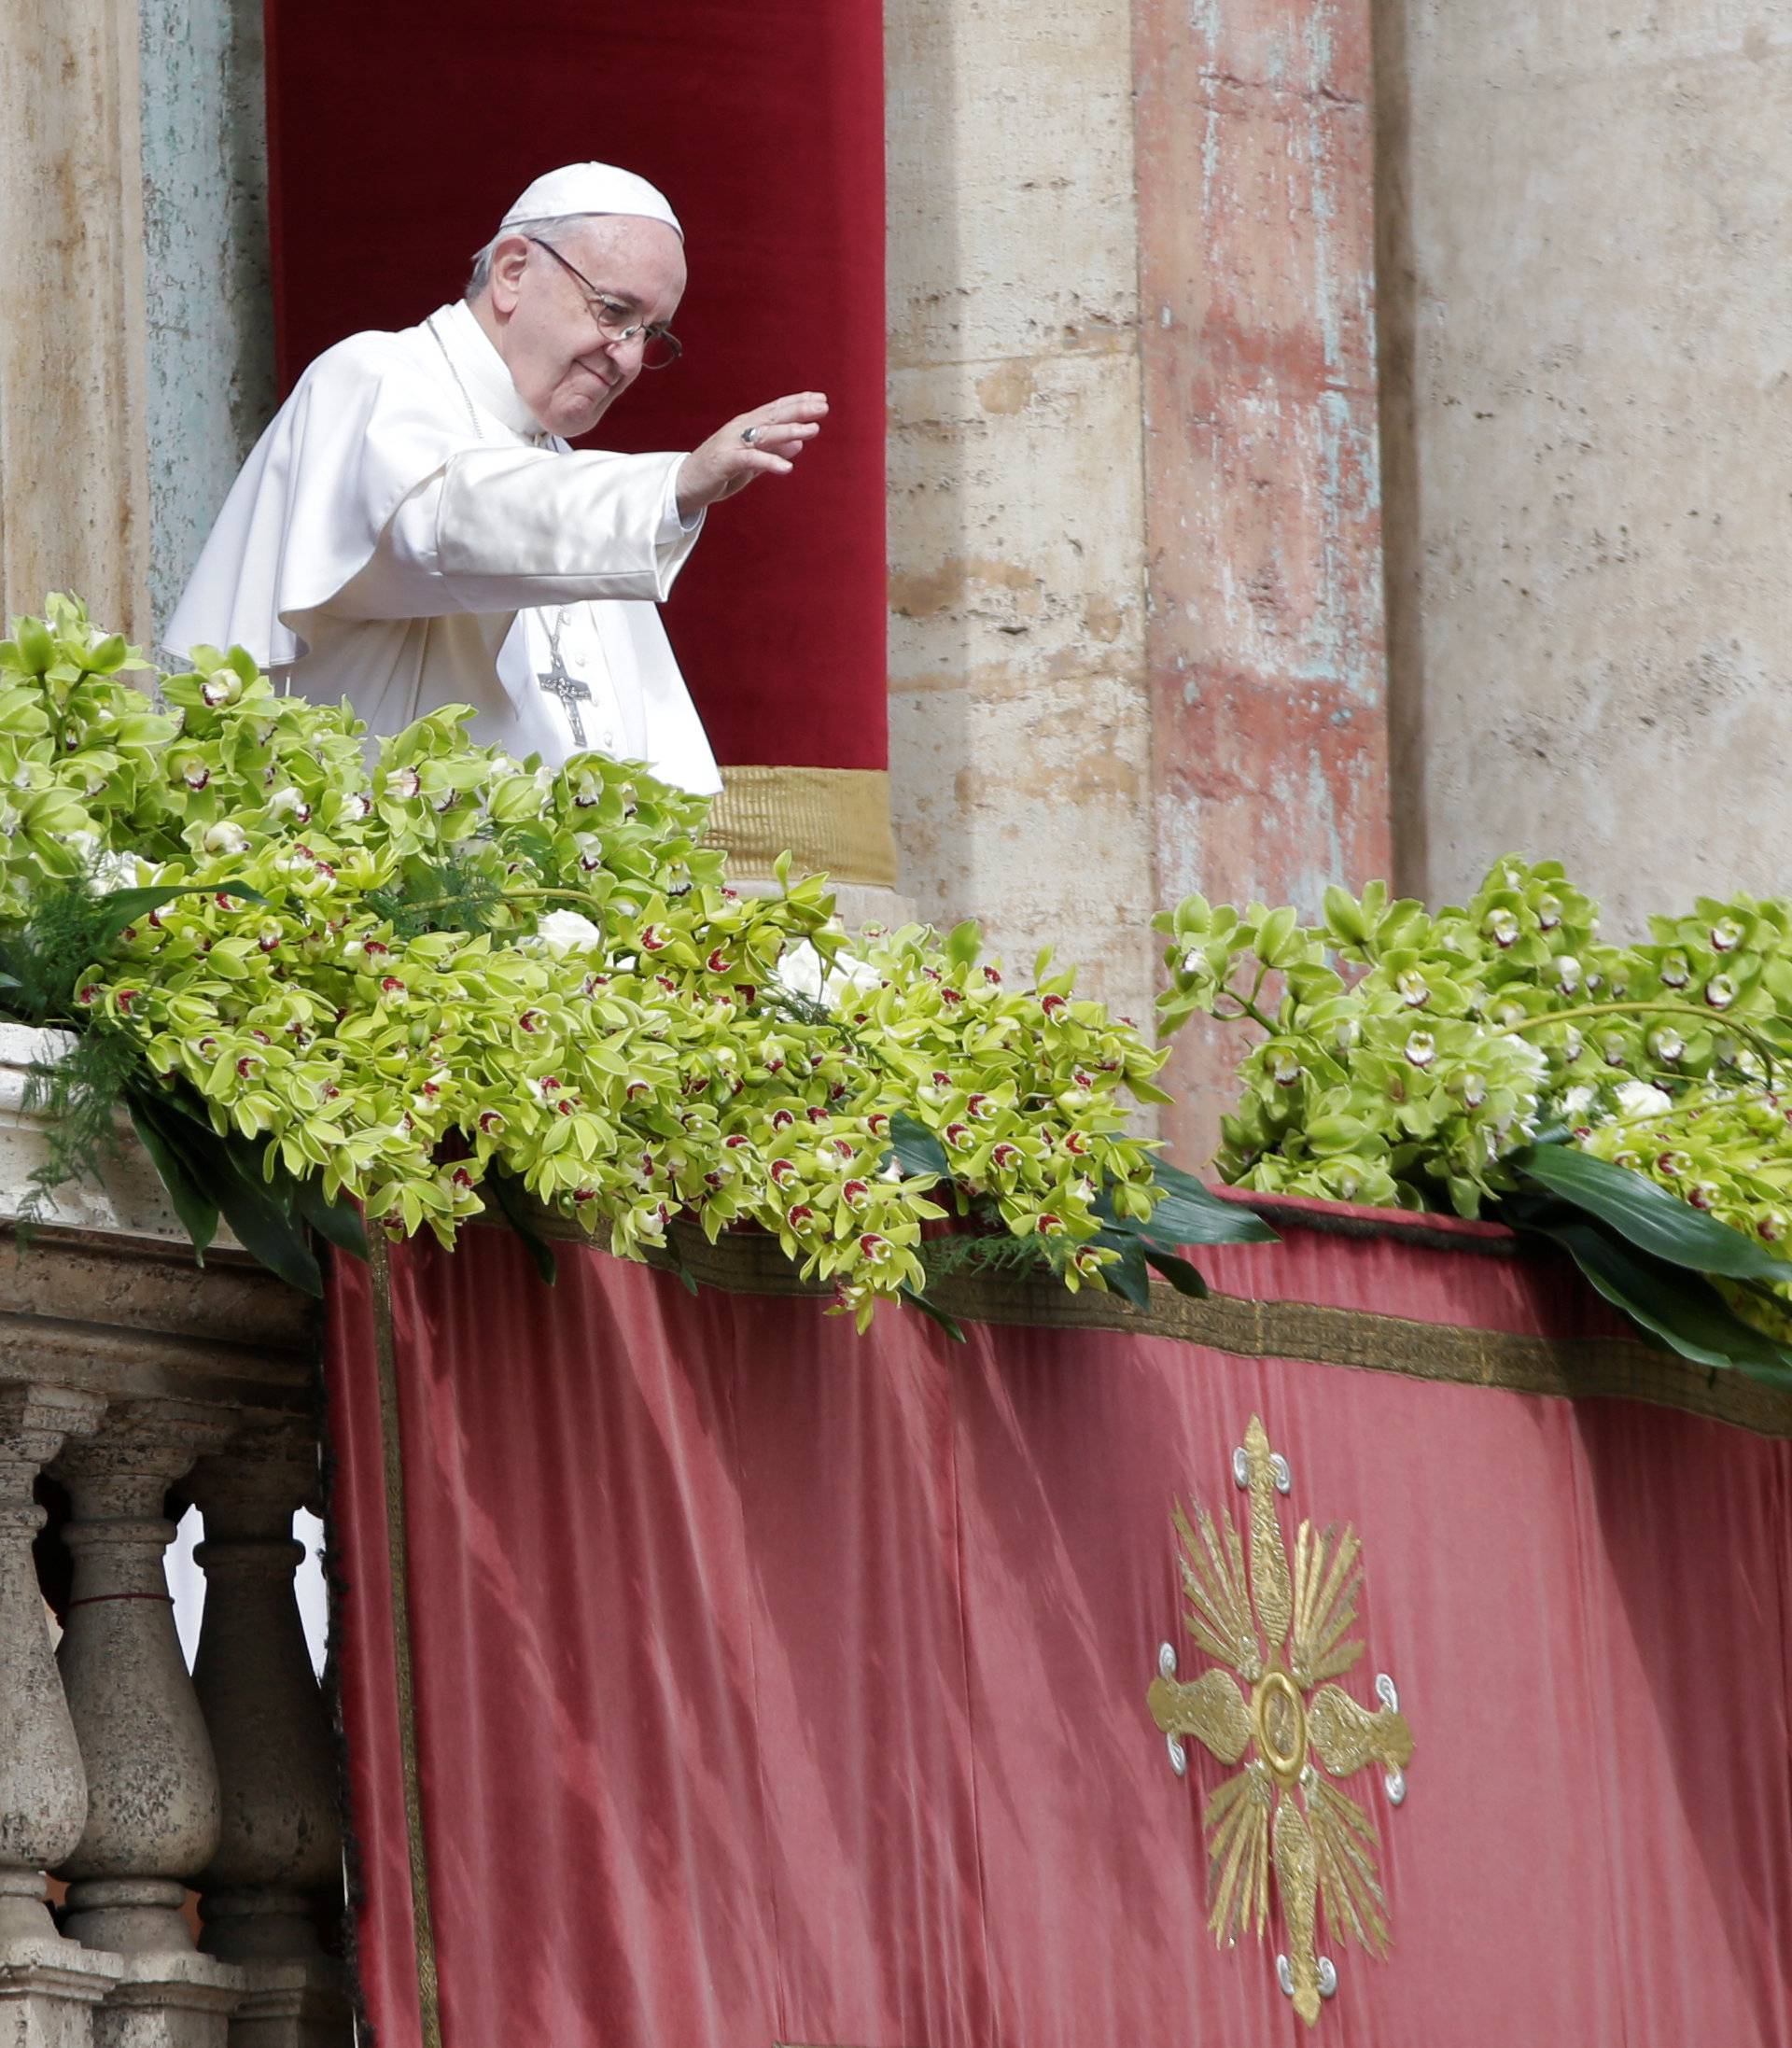 Pope Francis waves after delivering his Easter message in the Urbi et Orbi (to the city and the world) address from the balcony overlooking St. Peter's Square at the Vatican